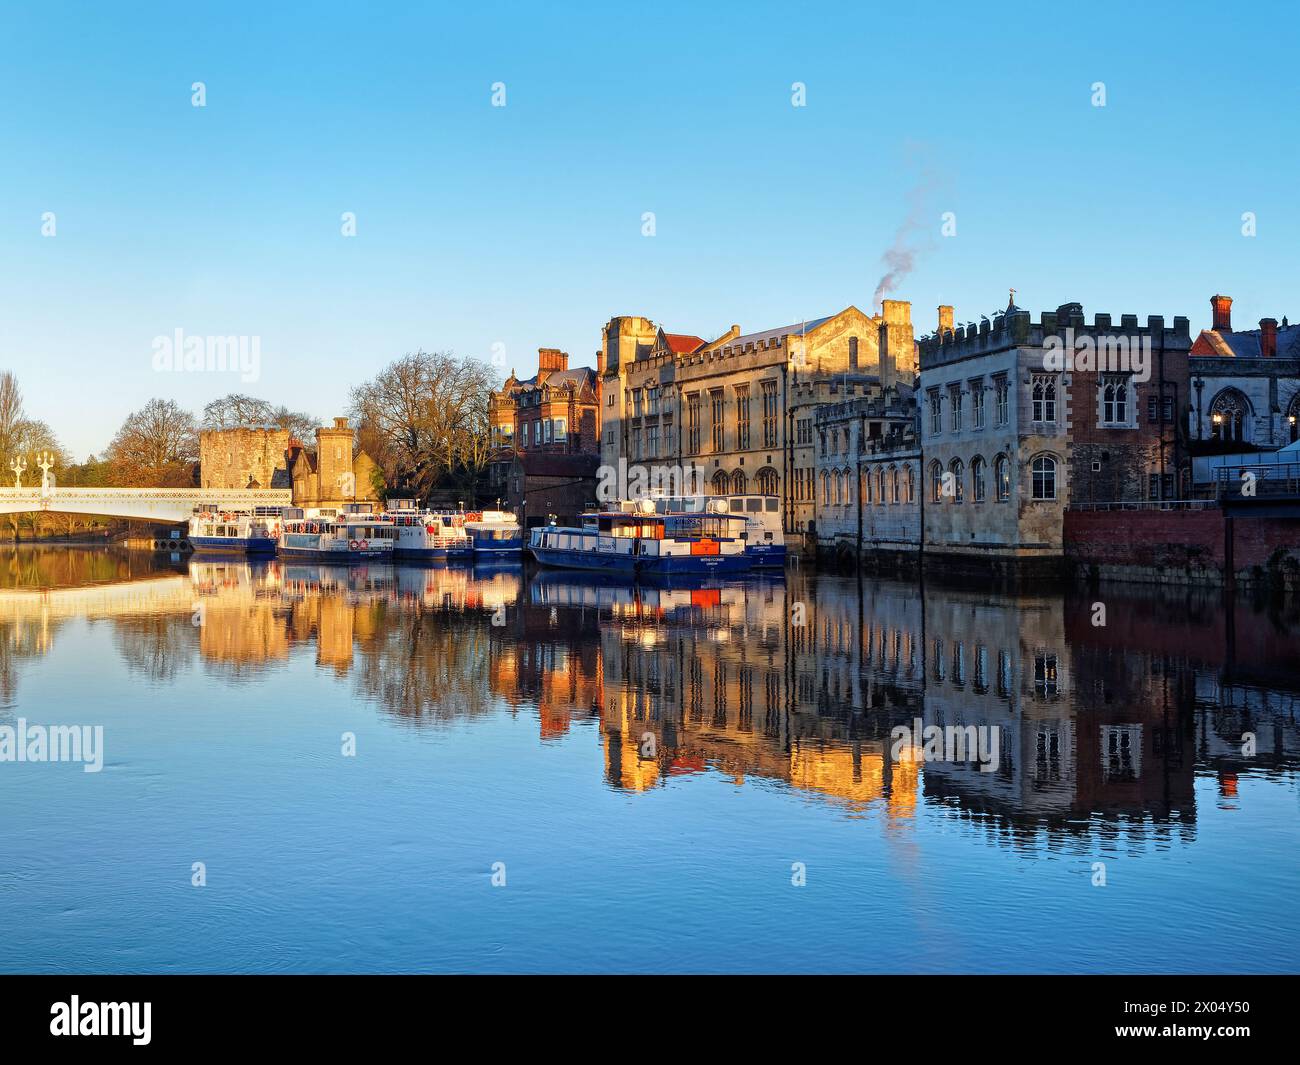 UK, North Yorkshire, York, Lendal Tower, Lendal Bridge and York Guildhall next to the River Ouse. Stock Photo